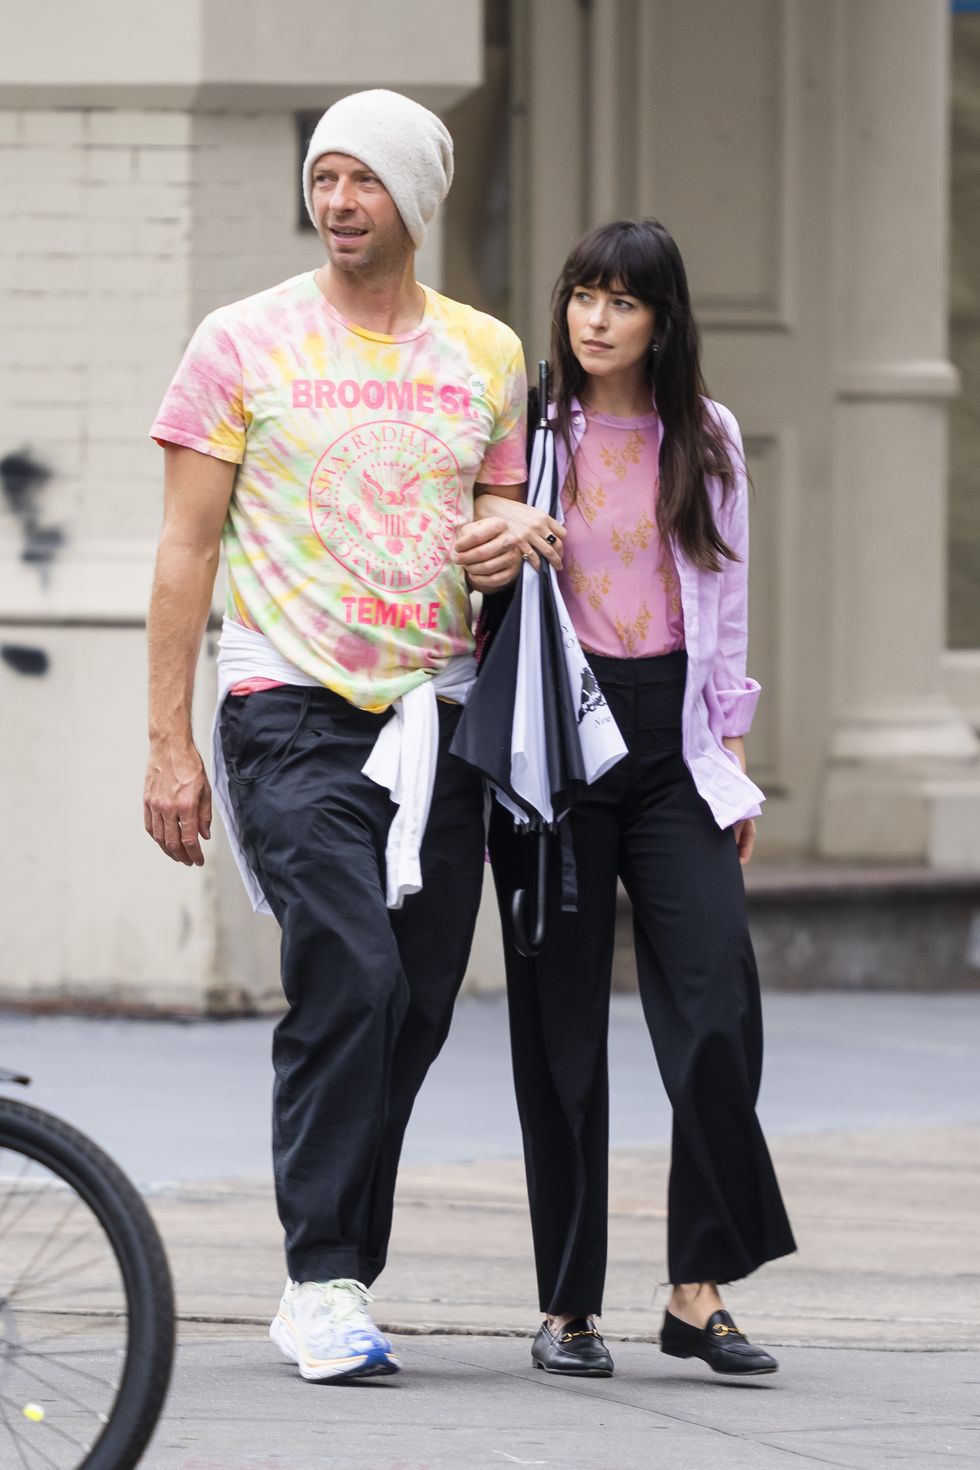 06072022 exclusive chris martin and dakota johnson step out for a stroll in new york city the 45 year old english singer songwriter and his 32 year old actress girlfriend walked through trendy soho arm in arm before they were approached by a fan where chris presented her with a pin that said "love" before the couple continued on keeping close to one anothersalestheimagedirectcom please bylinetheimagedirectcomexclusive please email salestheimagedirectcom for fees before use